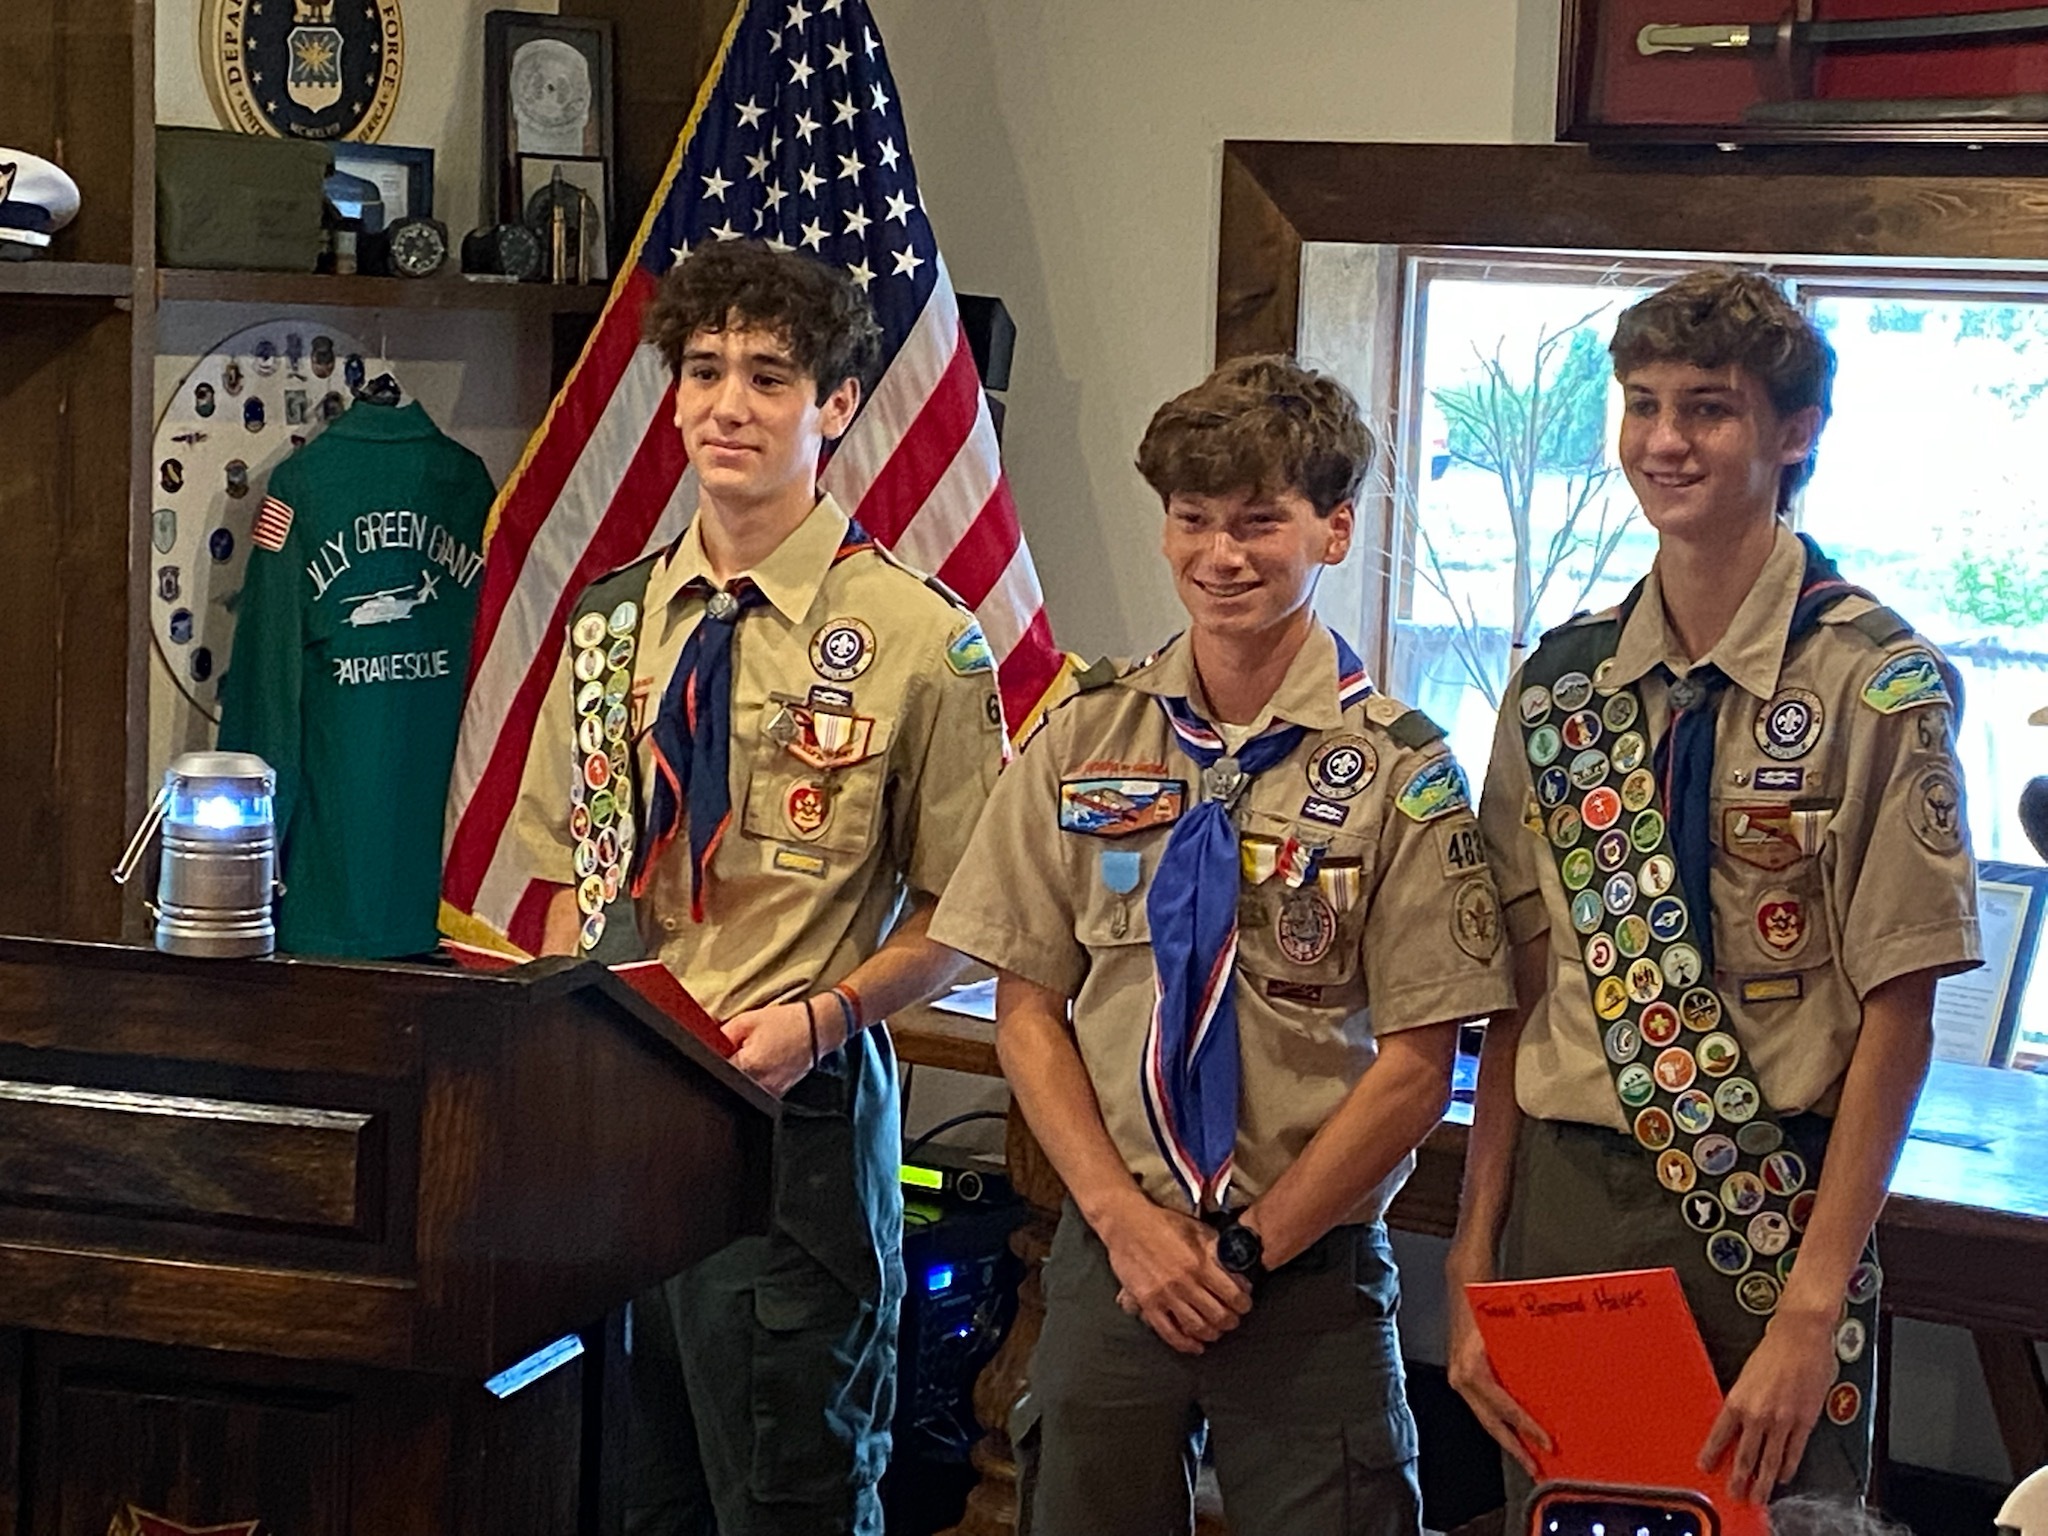 An Eagle Court of Honor was held at VFW Post 5350 in Westhampton Beach on October 2, during which two new Eagle Scouts, Ethan Mastrole, left, and Trevor Hayes, right, from Troop 62 in Westhampton Beach, were honored. Eagle Scout Max Huynia, center, was also at the ceremony. COURTESY WILLIAM HUGHES